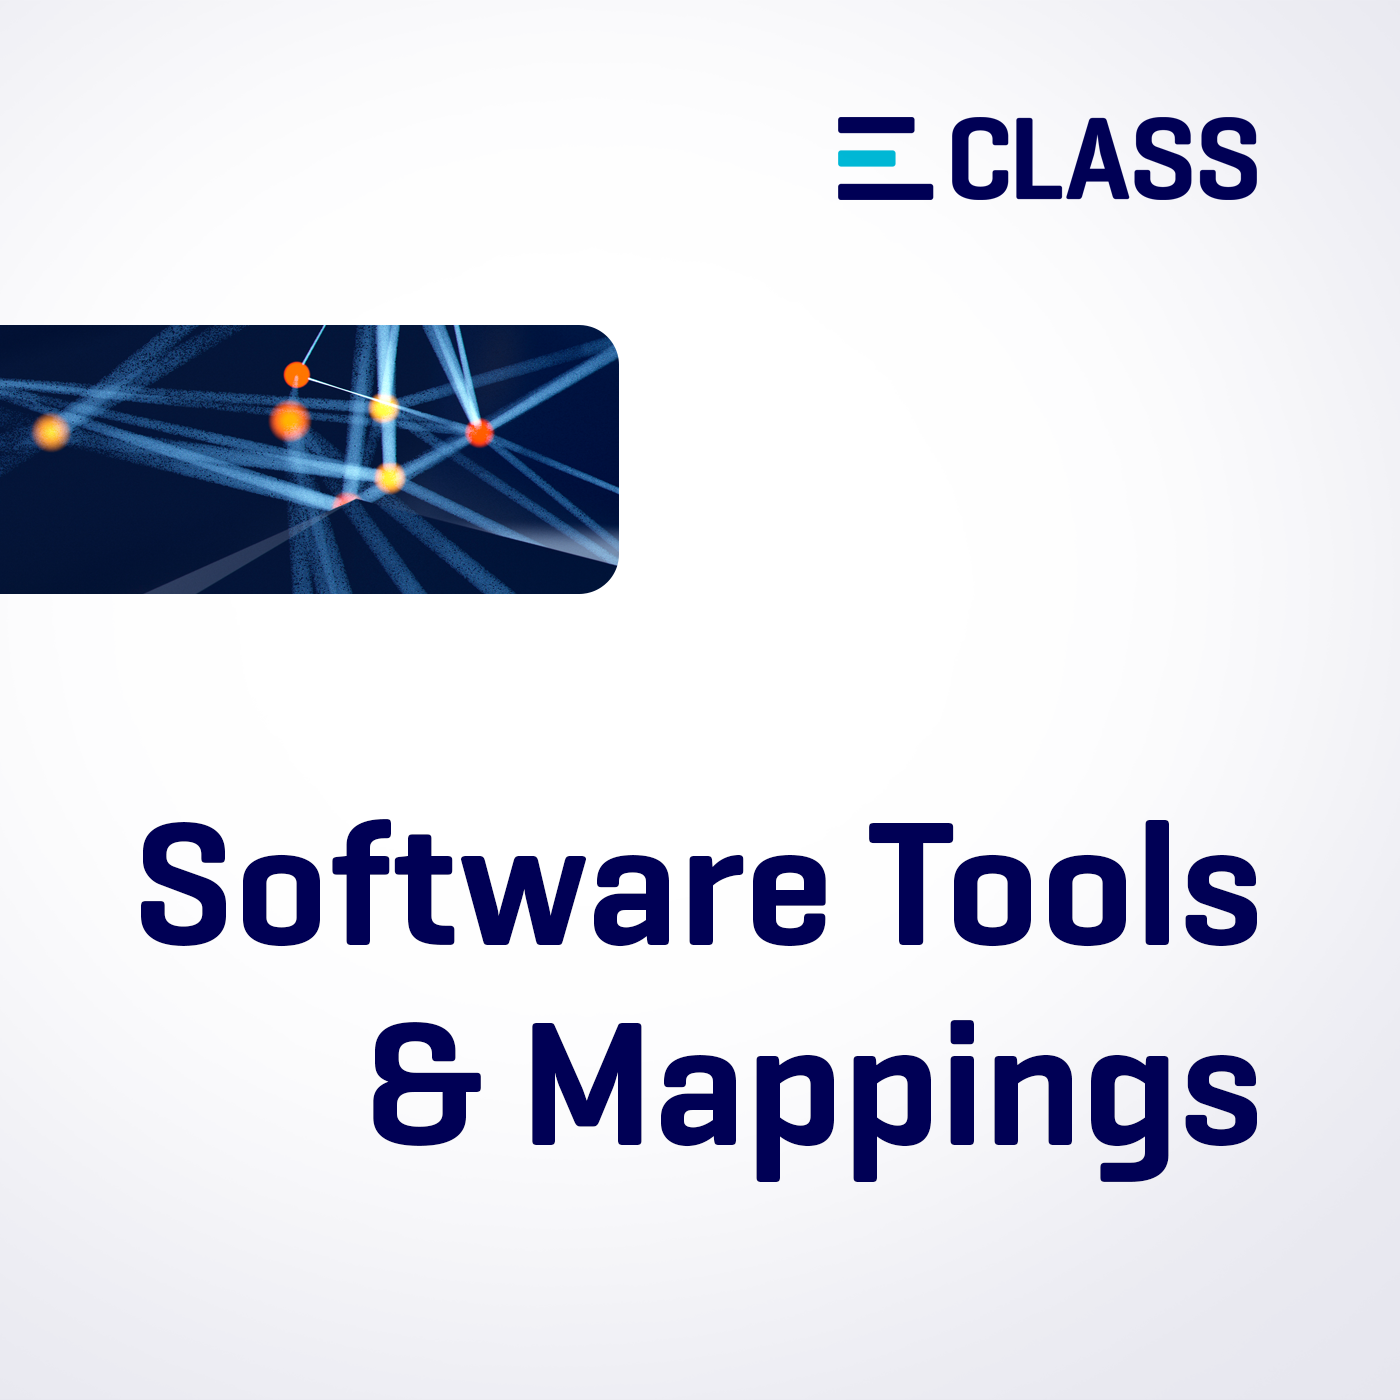 Produktbild: Software-Tools und Mappings